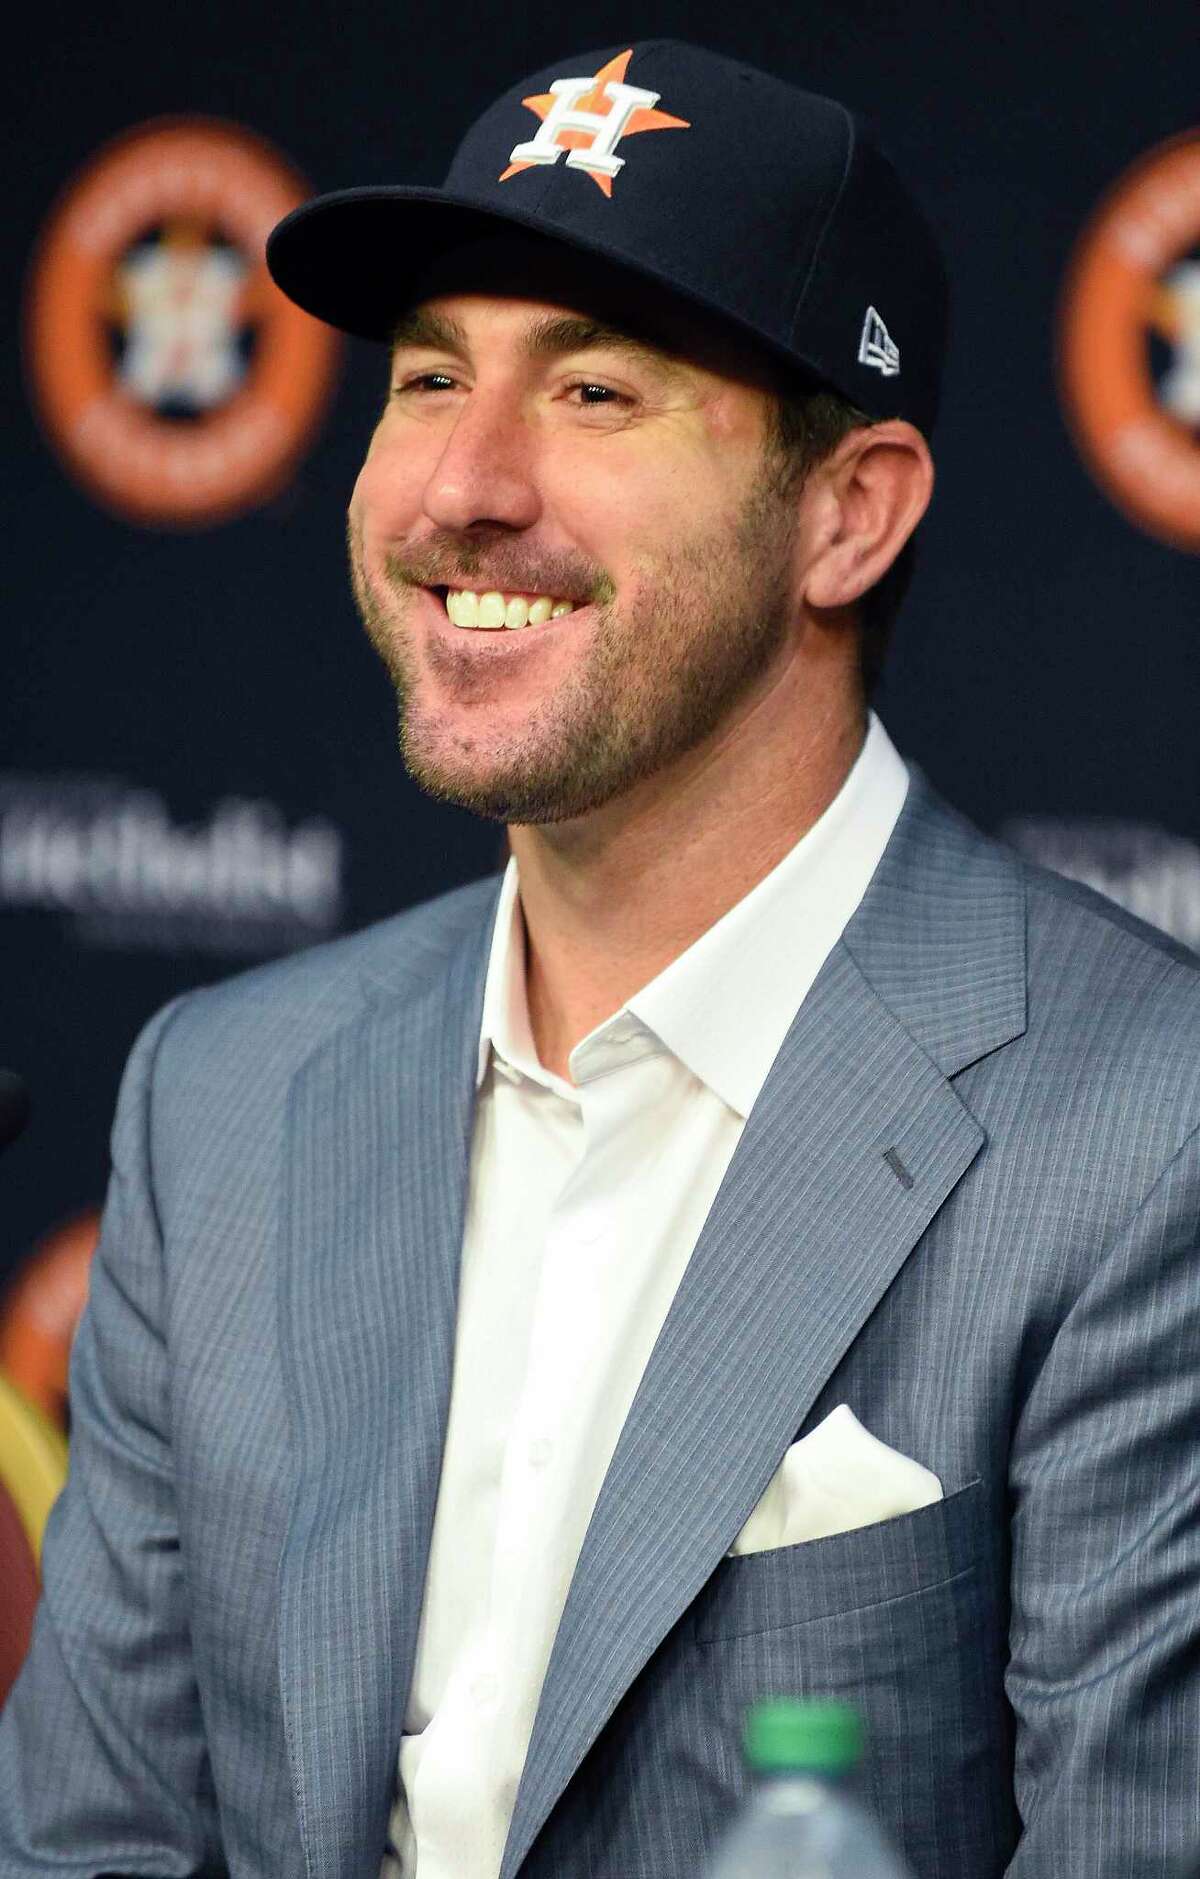 Houston Astros pitcher Justin Verlander smiles during a press conference introducing Verlander before a baseball game against the New York Mets, Sunday, Sept. 3, 2017, in Houston. Verlander was traded to Houston from the Detroit Tigers on Thursday. (AP Photo/Eric Christian Smith)